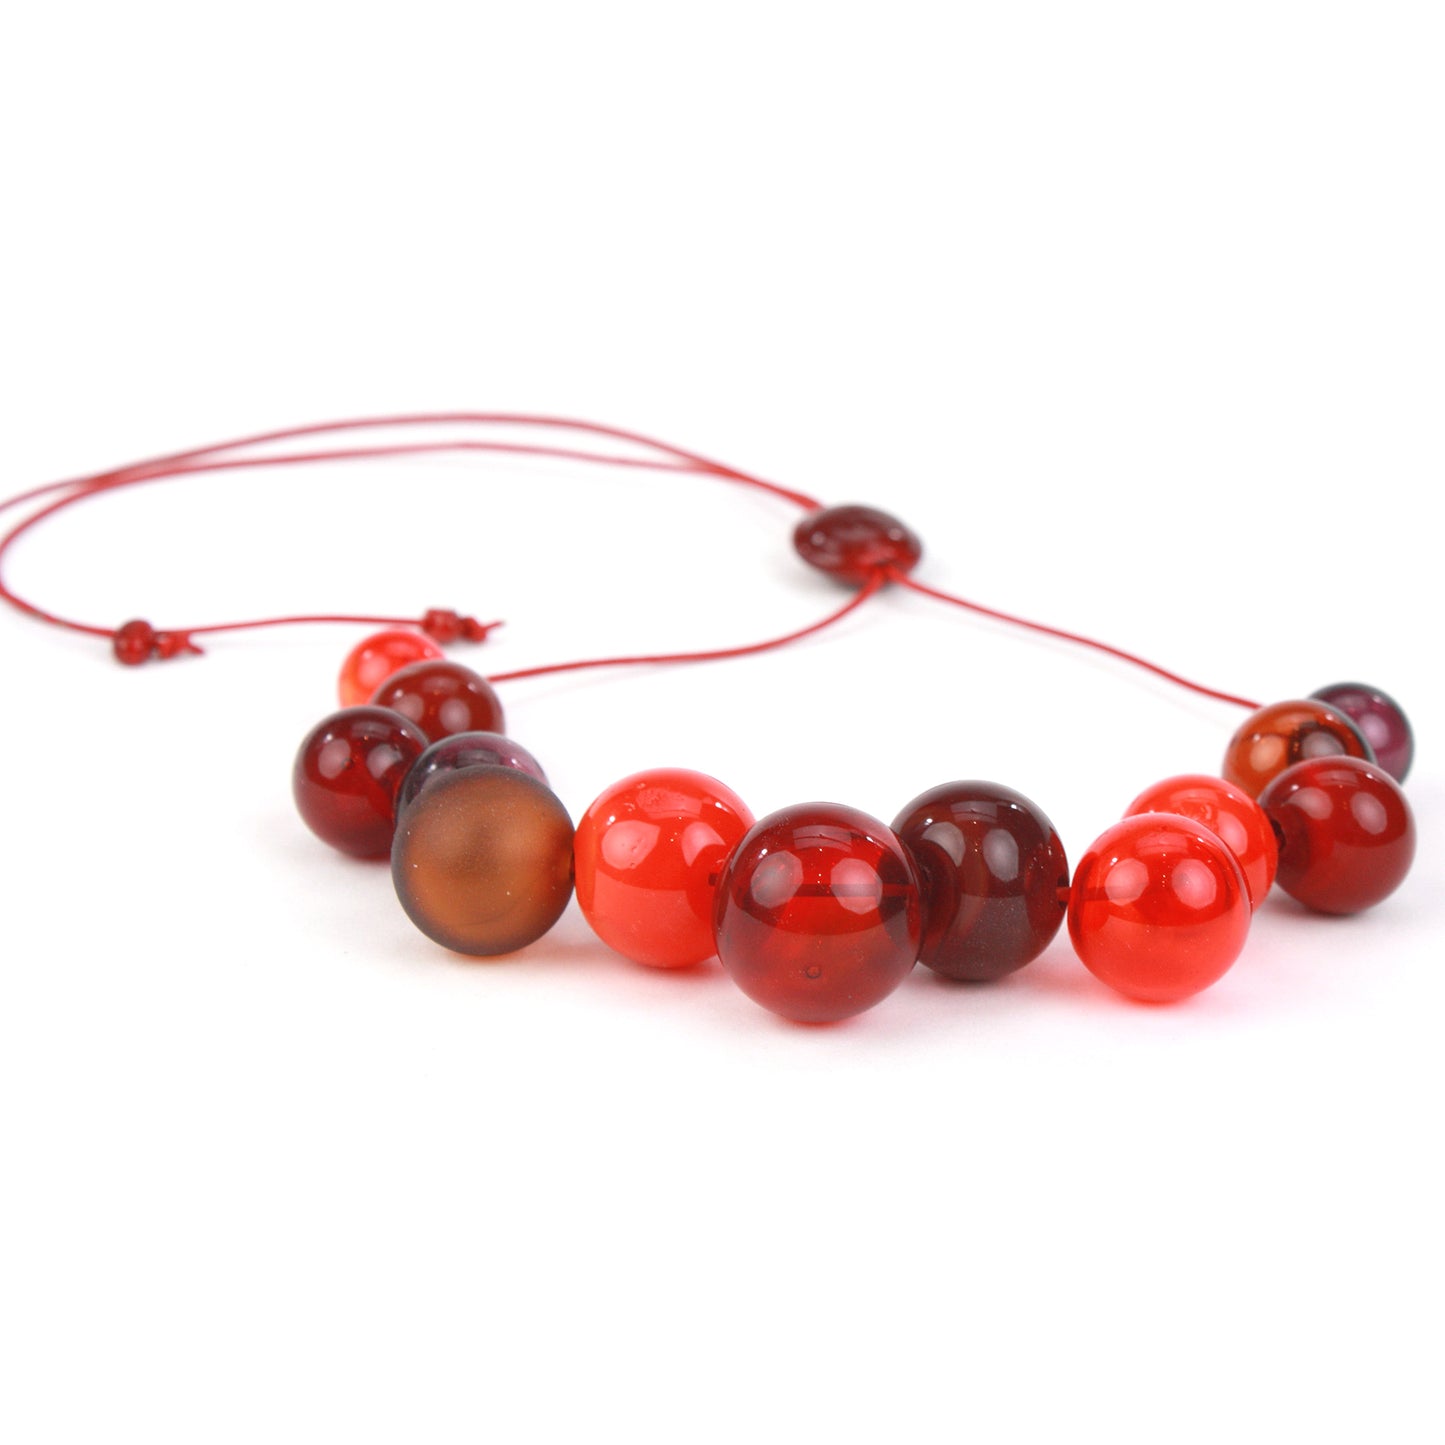 Bolla offset necklace -Mixed shades of reds and oranges